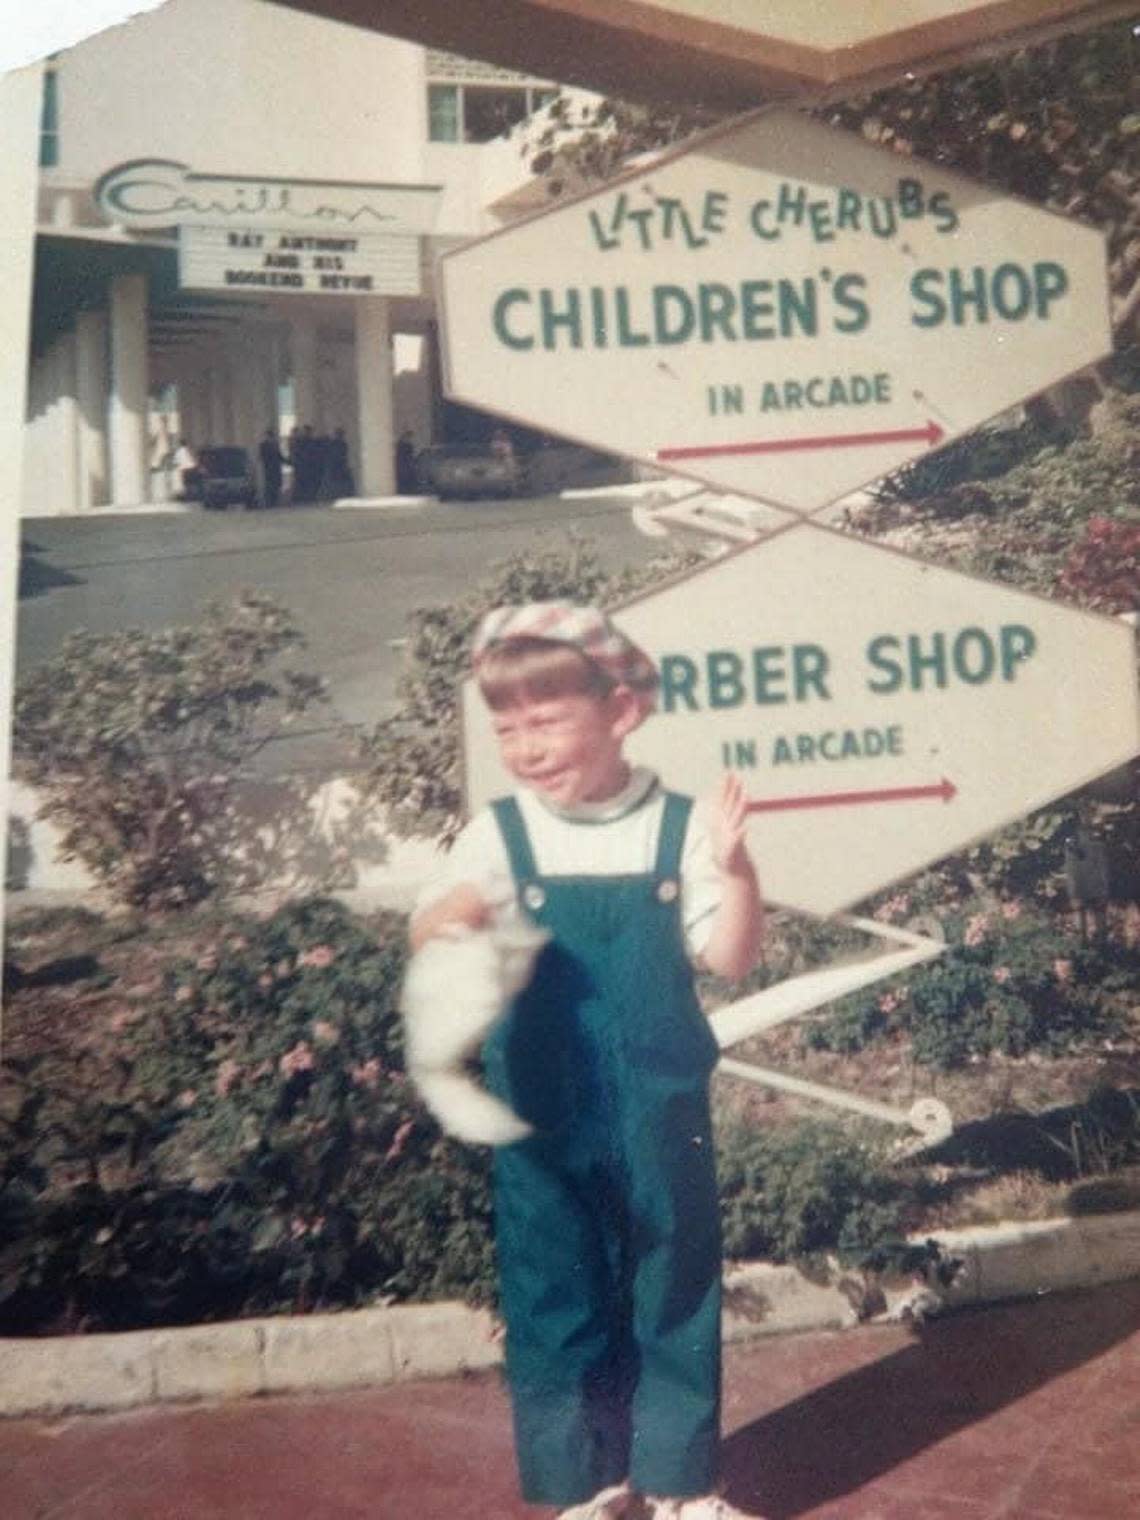 Modeling the latest fashion from Little Cherubs children’s shop in front of the Carillon Hotel in the 1960s. Jeff Kleinman’s parents opened the business in 1965 and their son spent every weekend in the store and roaming the hotel for more than 12 years.